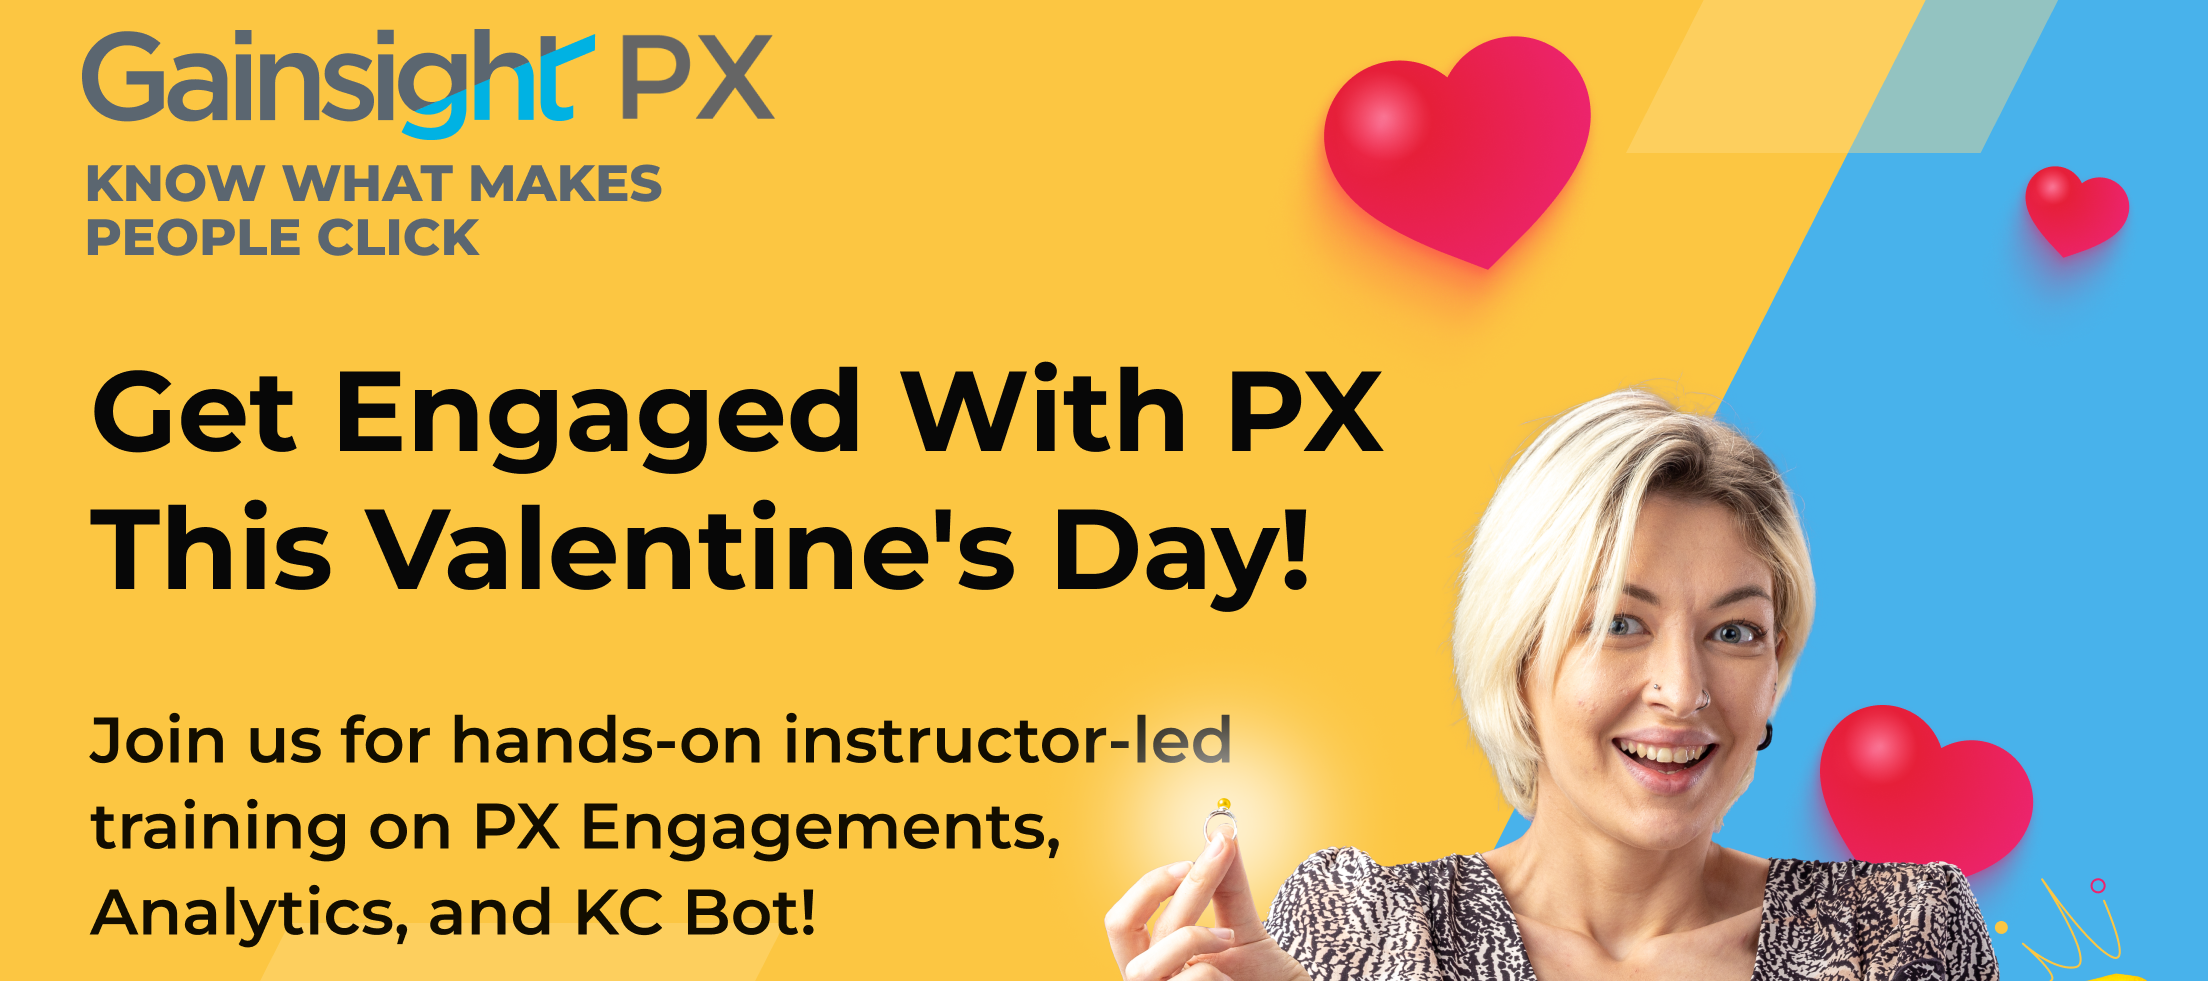 Win Free Live PX Training by Sharing What You Love about PX